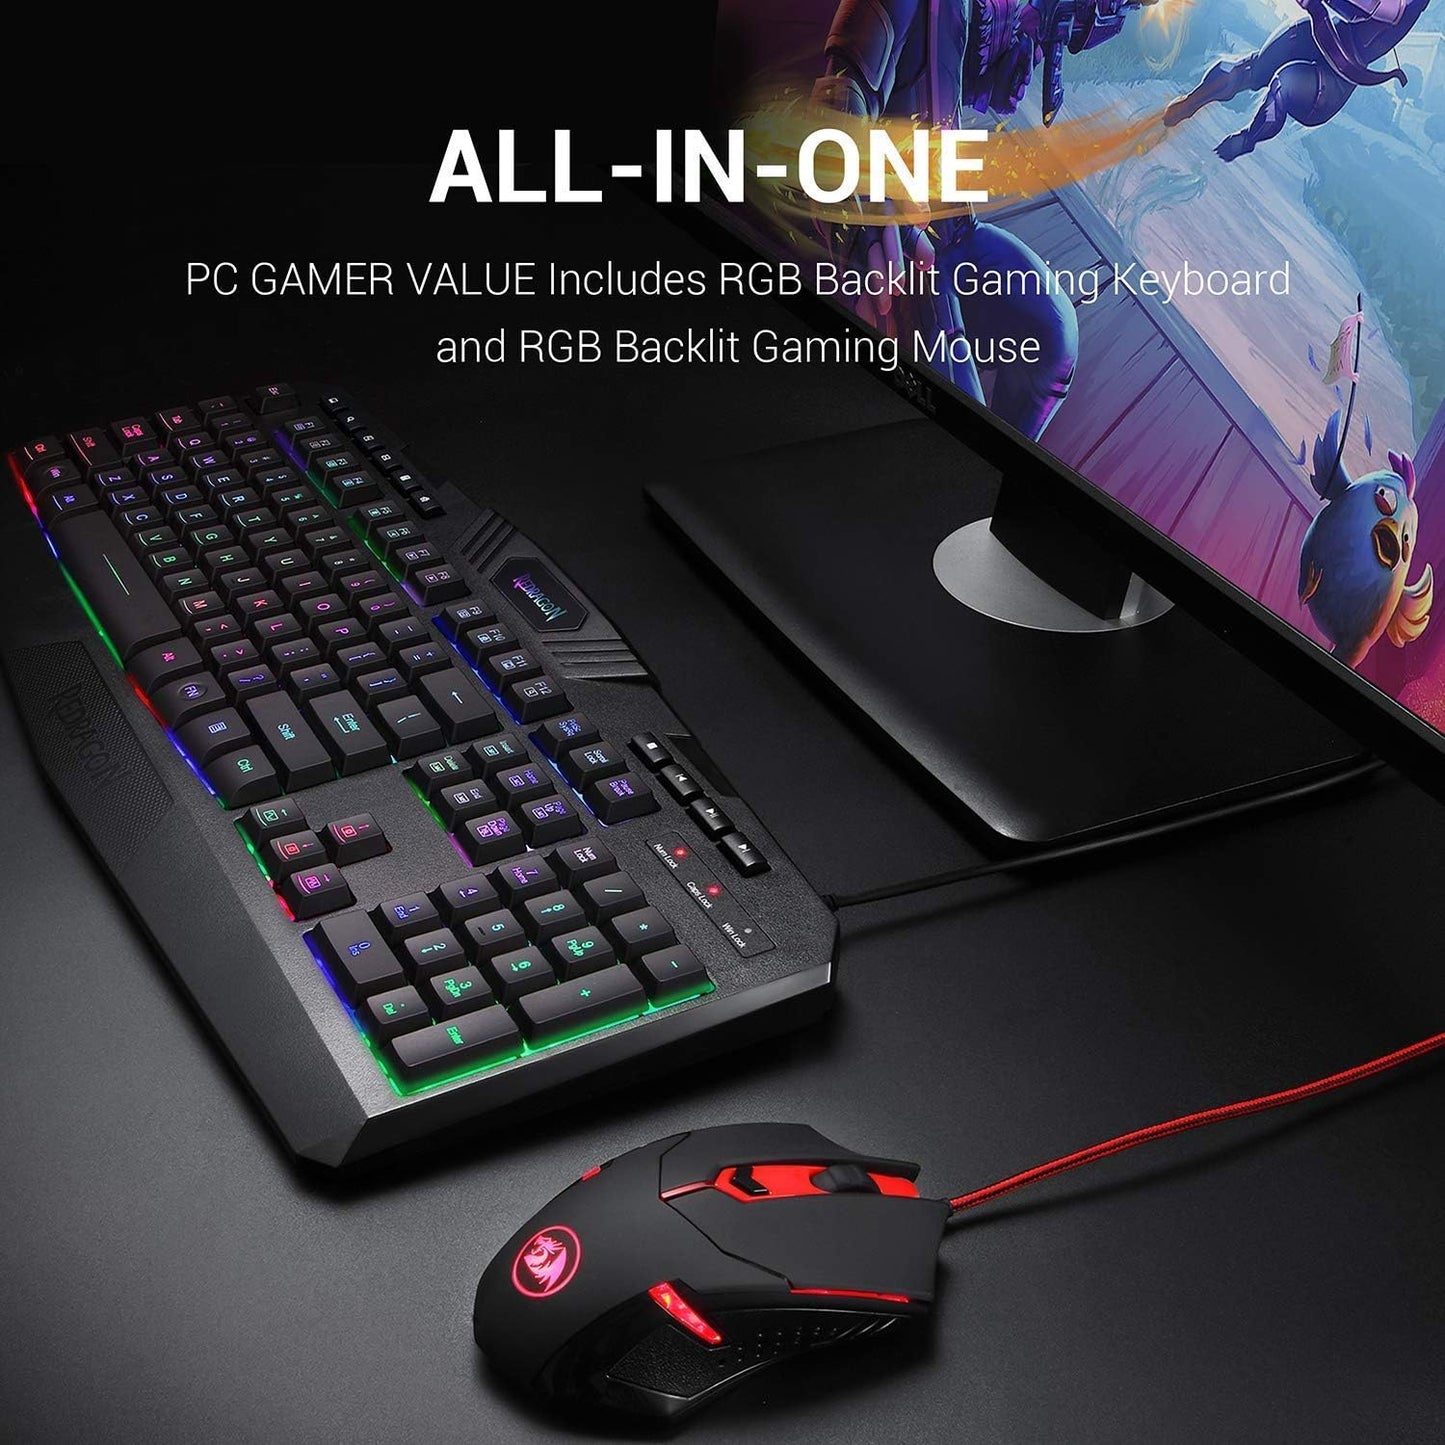 "Optimize Your Gaming Experience with the Redragon S101 Gaming Keyboard and M601 Mouse Combo - Showcasing RGB Backlighting and Customizable Functions [New and Improved Version]"